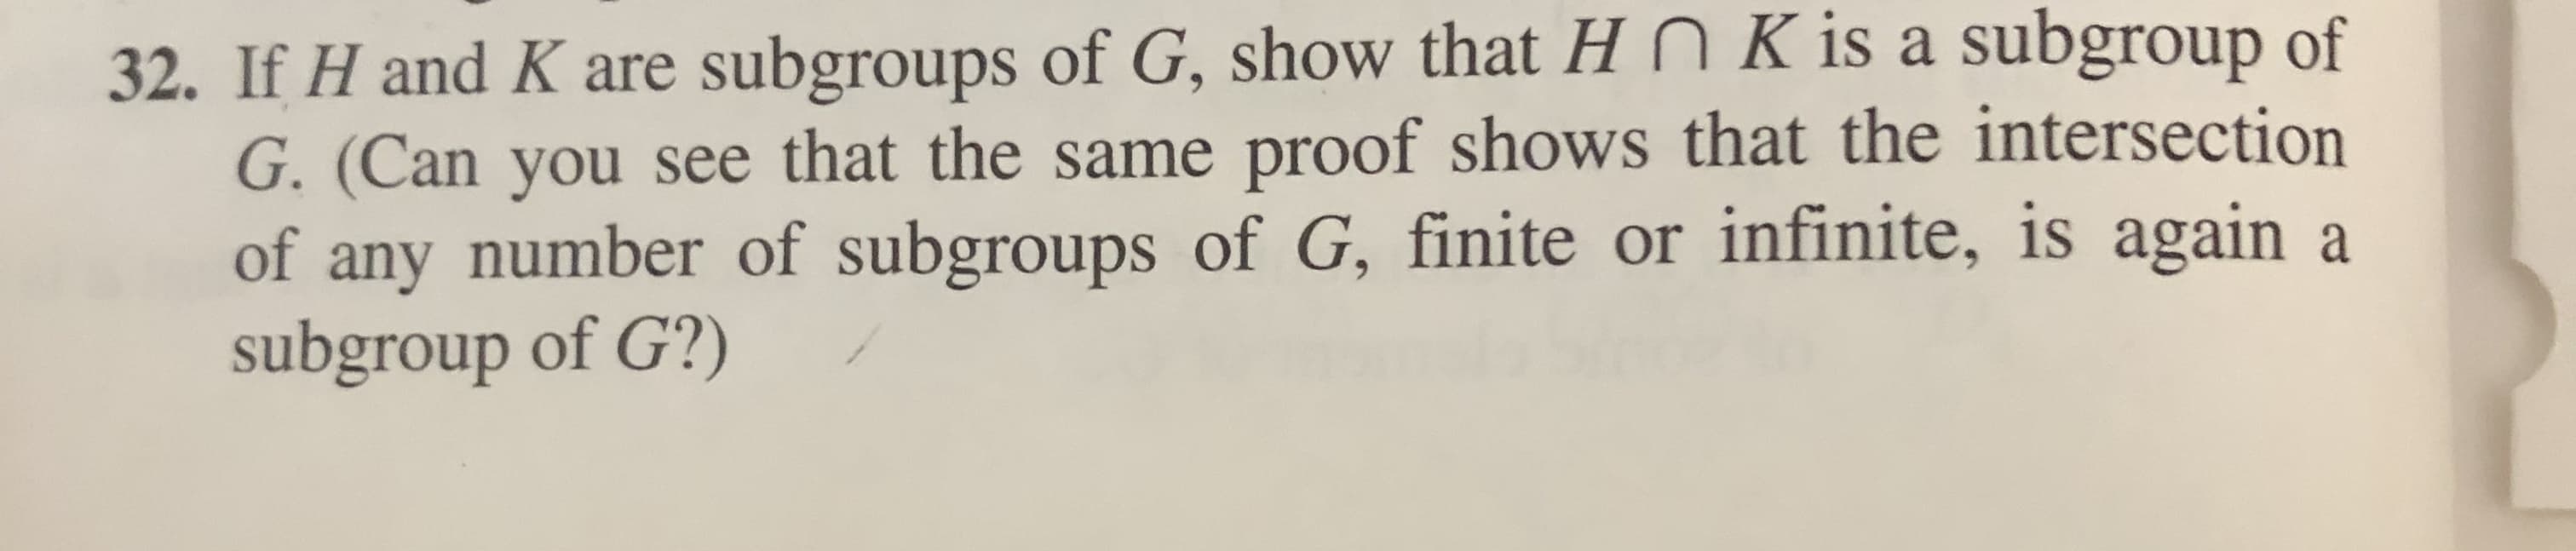 32. If H and K are subgroups of G, show that Hn K is a subgroup of
G. (Can you see that the same proof shows that the intersection
of any number of subgroups of G, finite or infinite, is again a
subgroup of G?)
